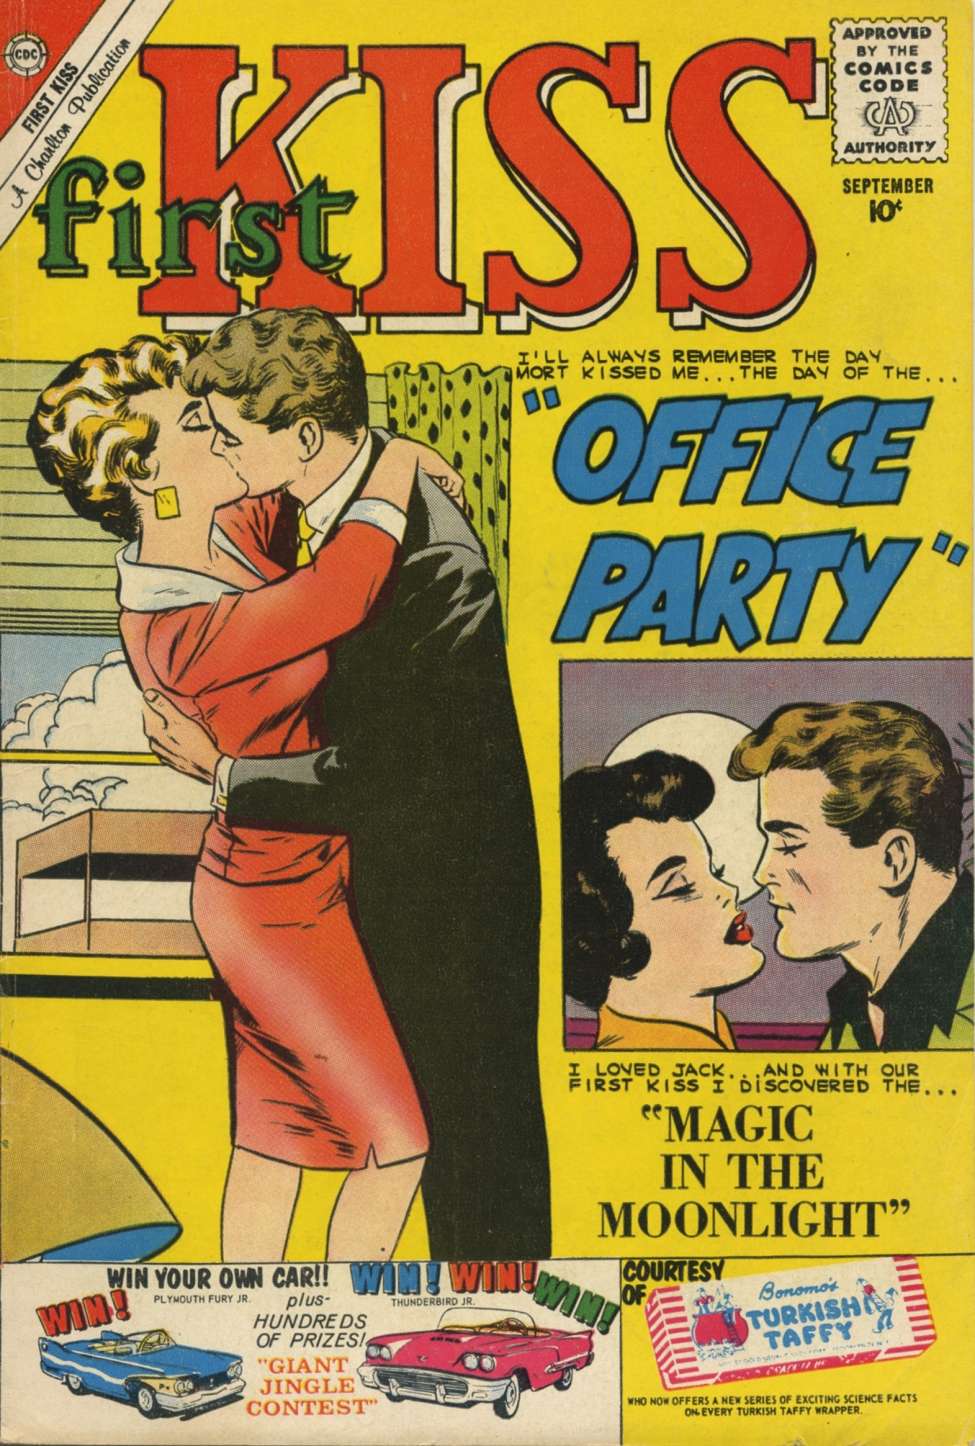 Book Cover For First Kiss 16